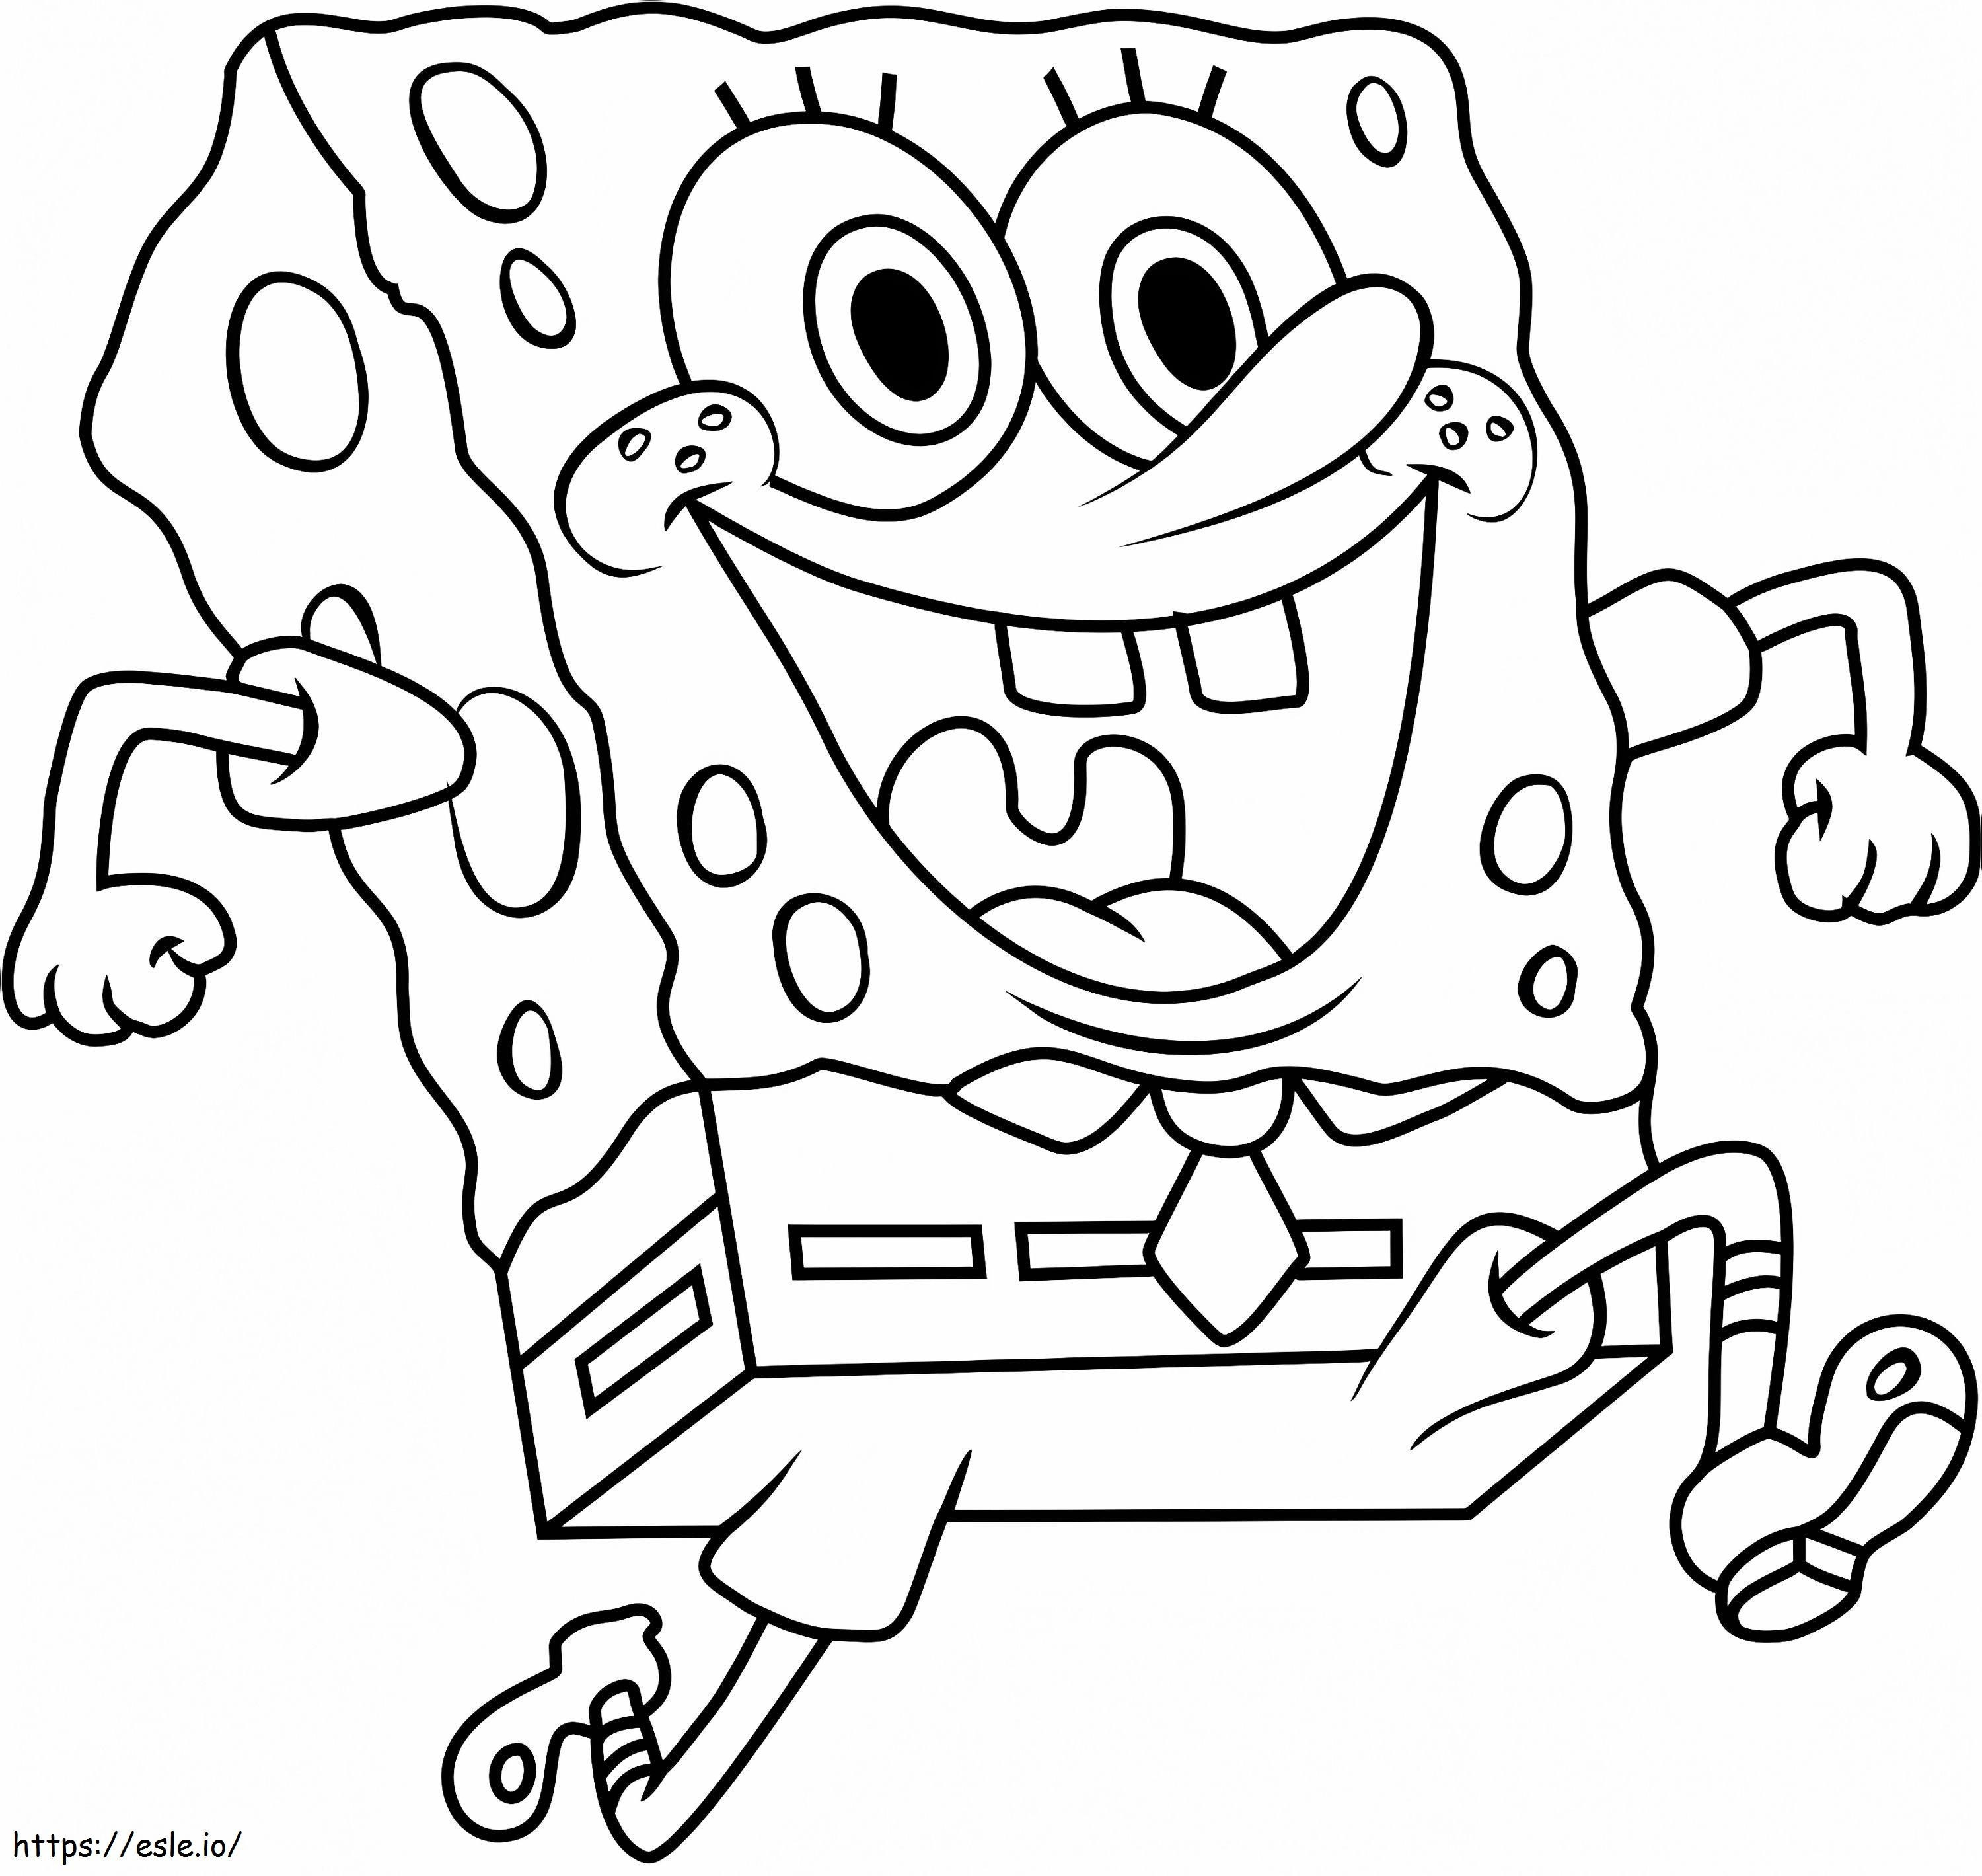 1564733555 Spongebob Running A4 coloring page